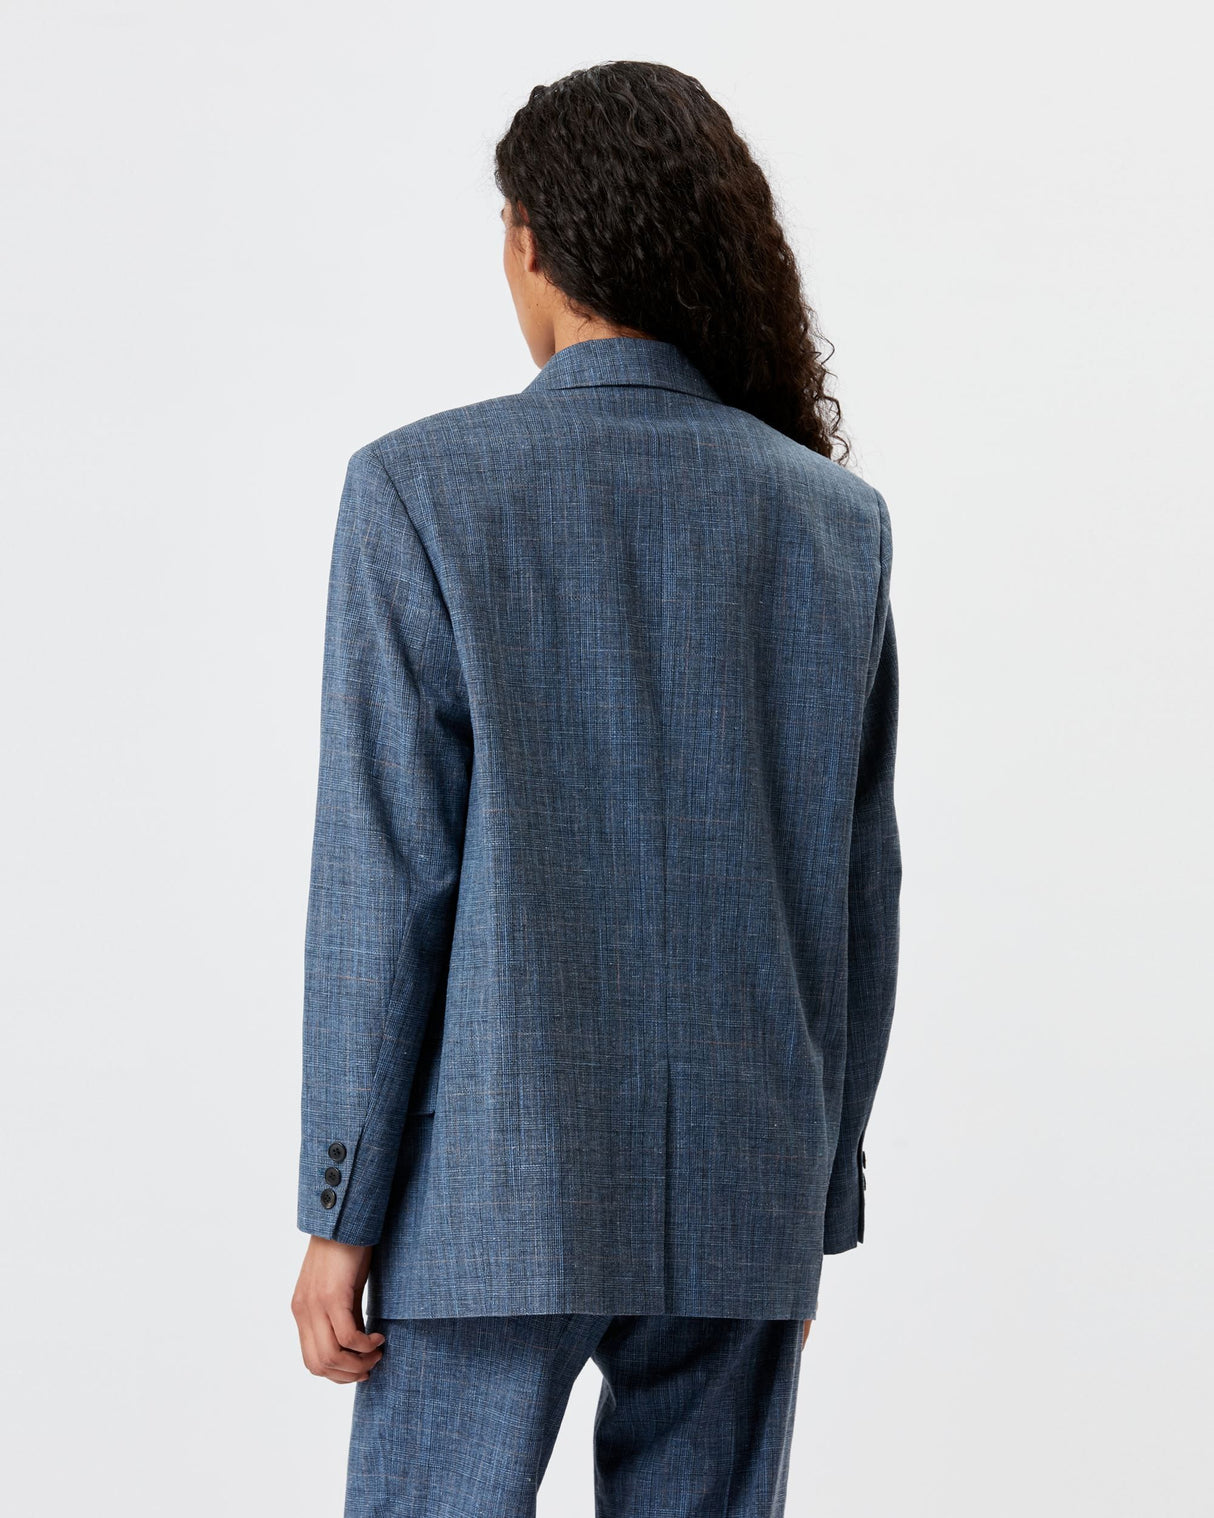 ISABEL MARANT ETOILE Blue Onilind Blazer for Women - SS23 Collection